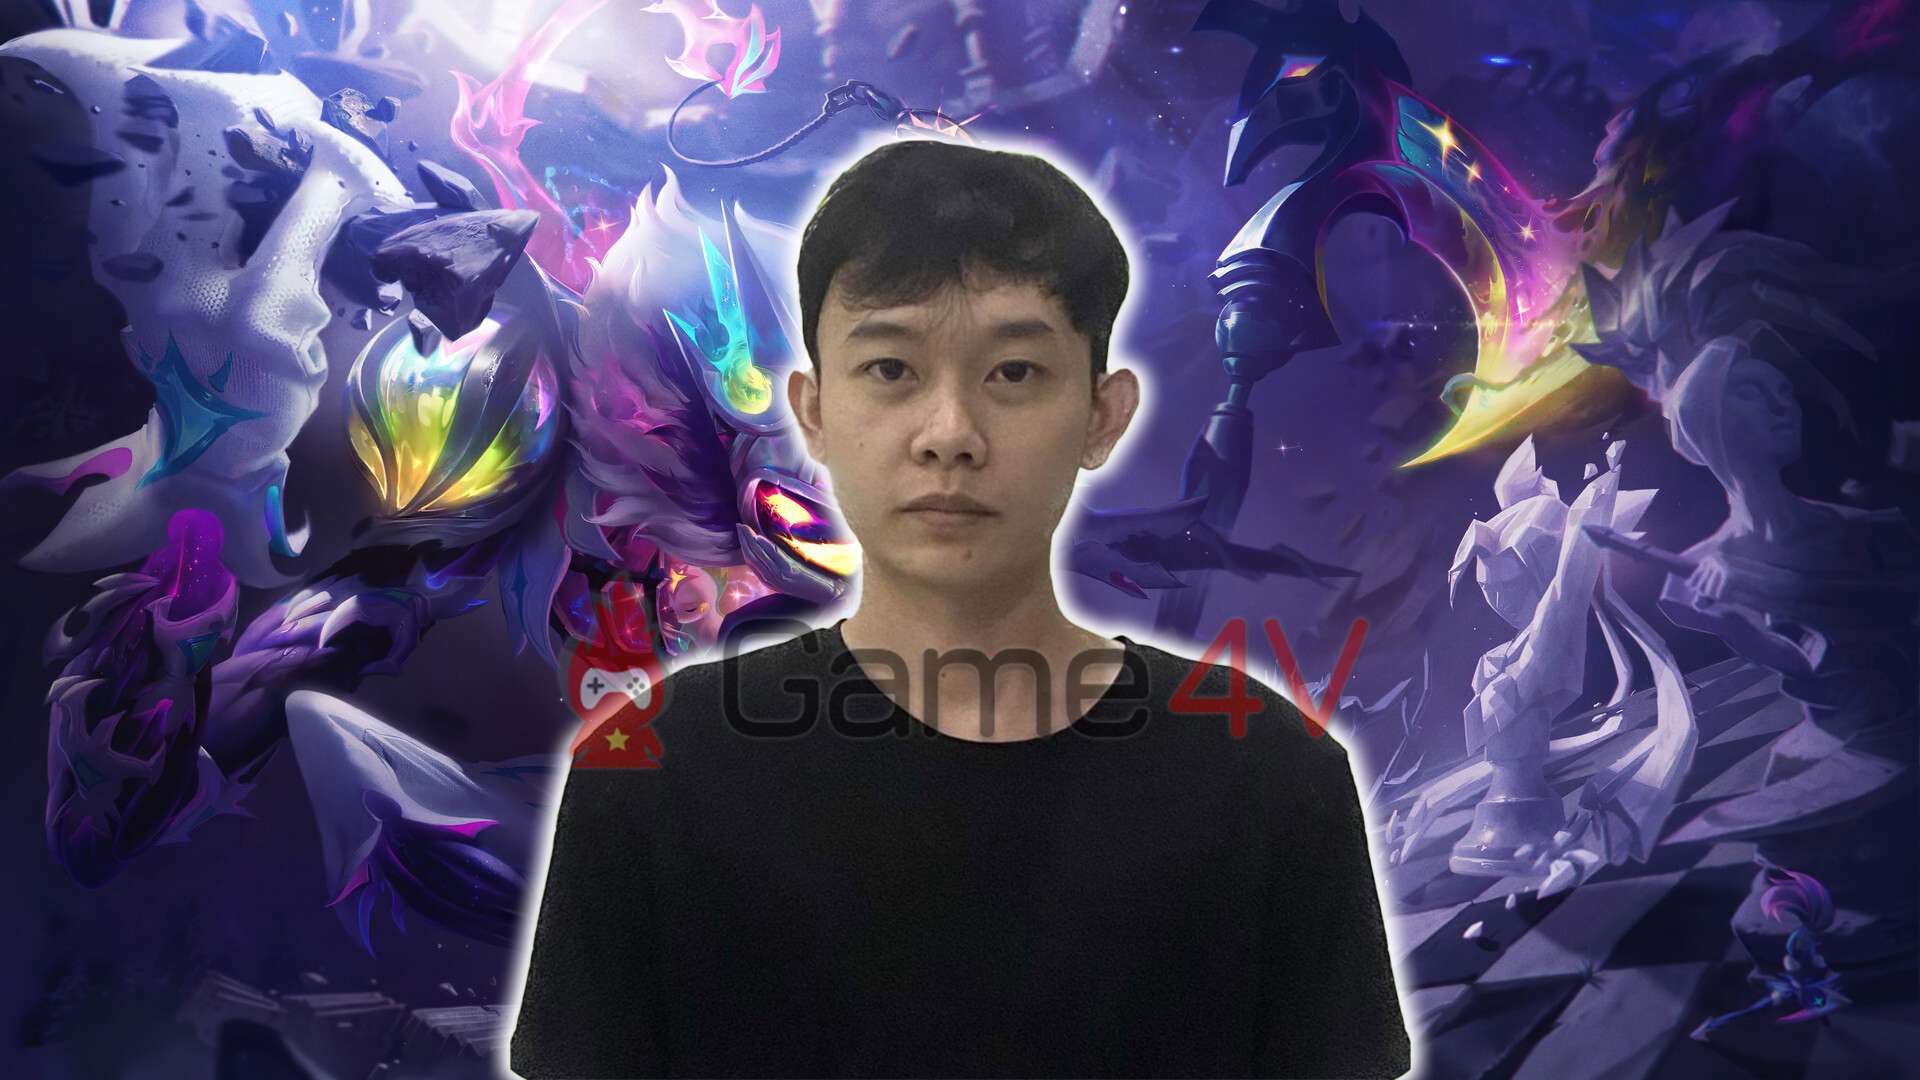 Revealing the first Vietnamese player who will appear at Worlds